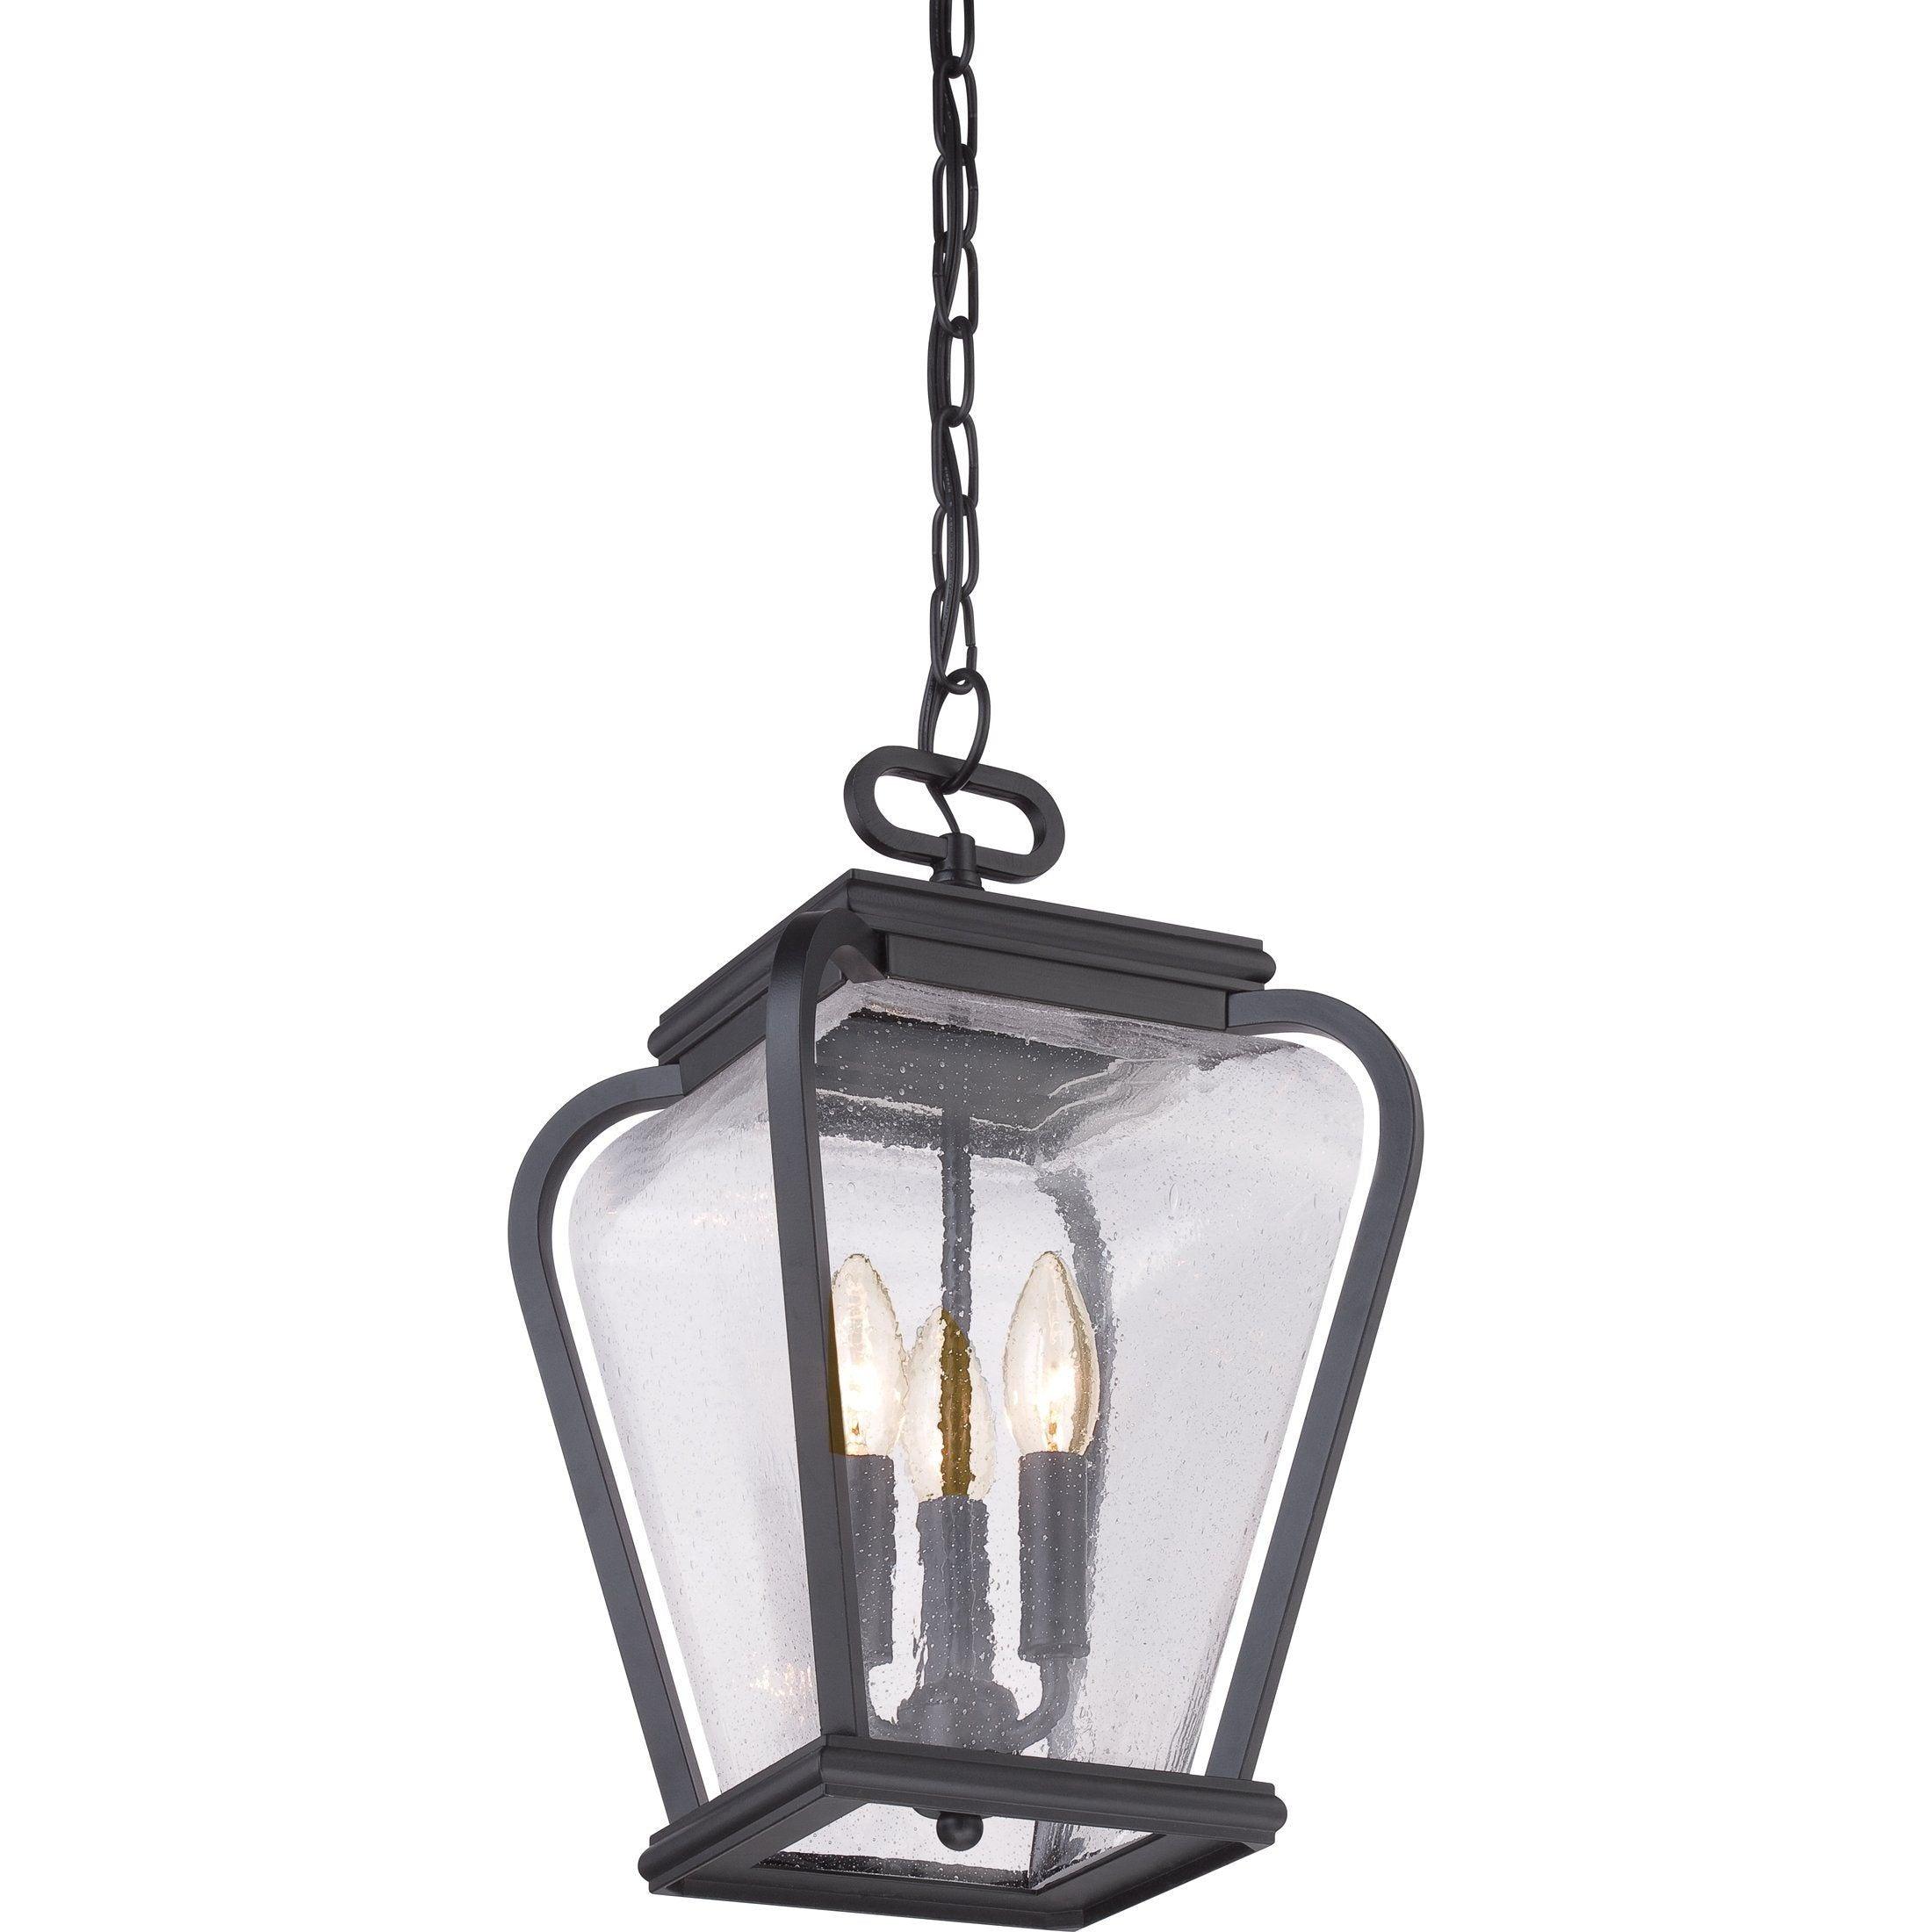 Quoizel - Province Outdoor Pendant - Lights Canada